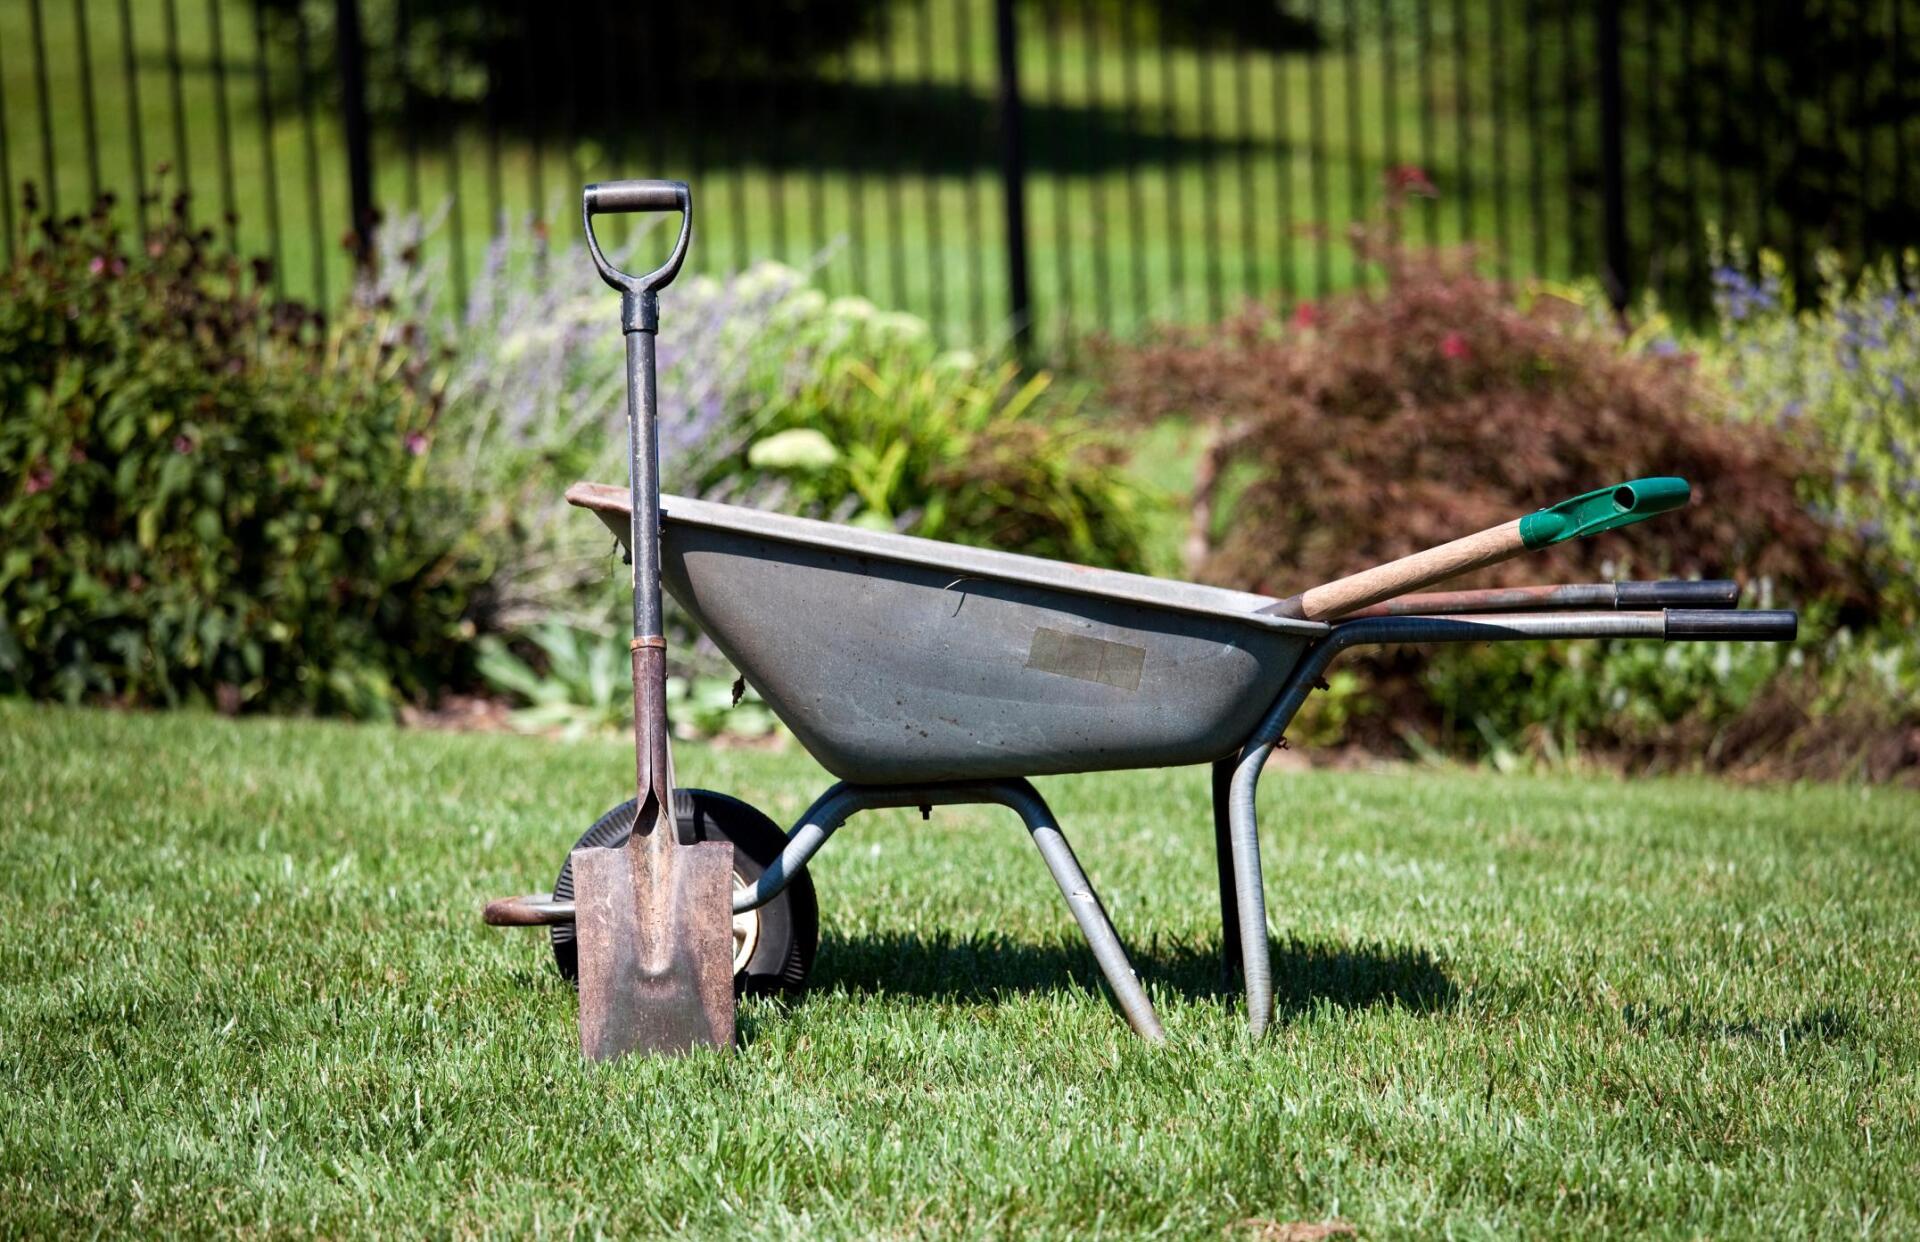 Landscaping Services offered by Yorba Landscaping in Yorba Linda. Shows Wheelbarrow with various landscaping tools in freshly mowed grass in front of newly planted flowers and bushes